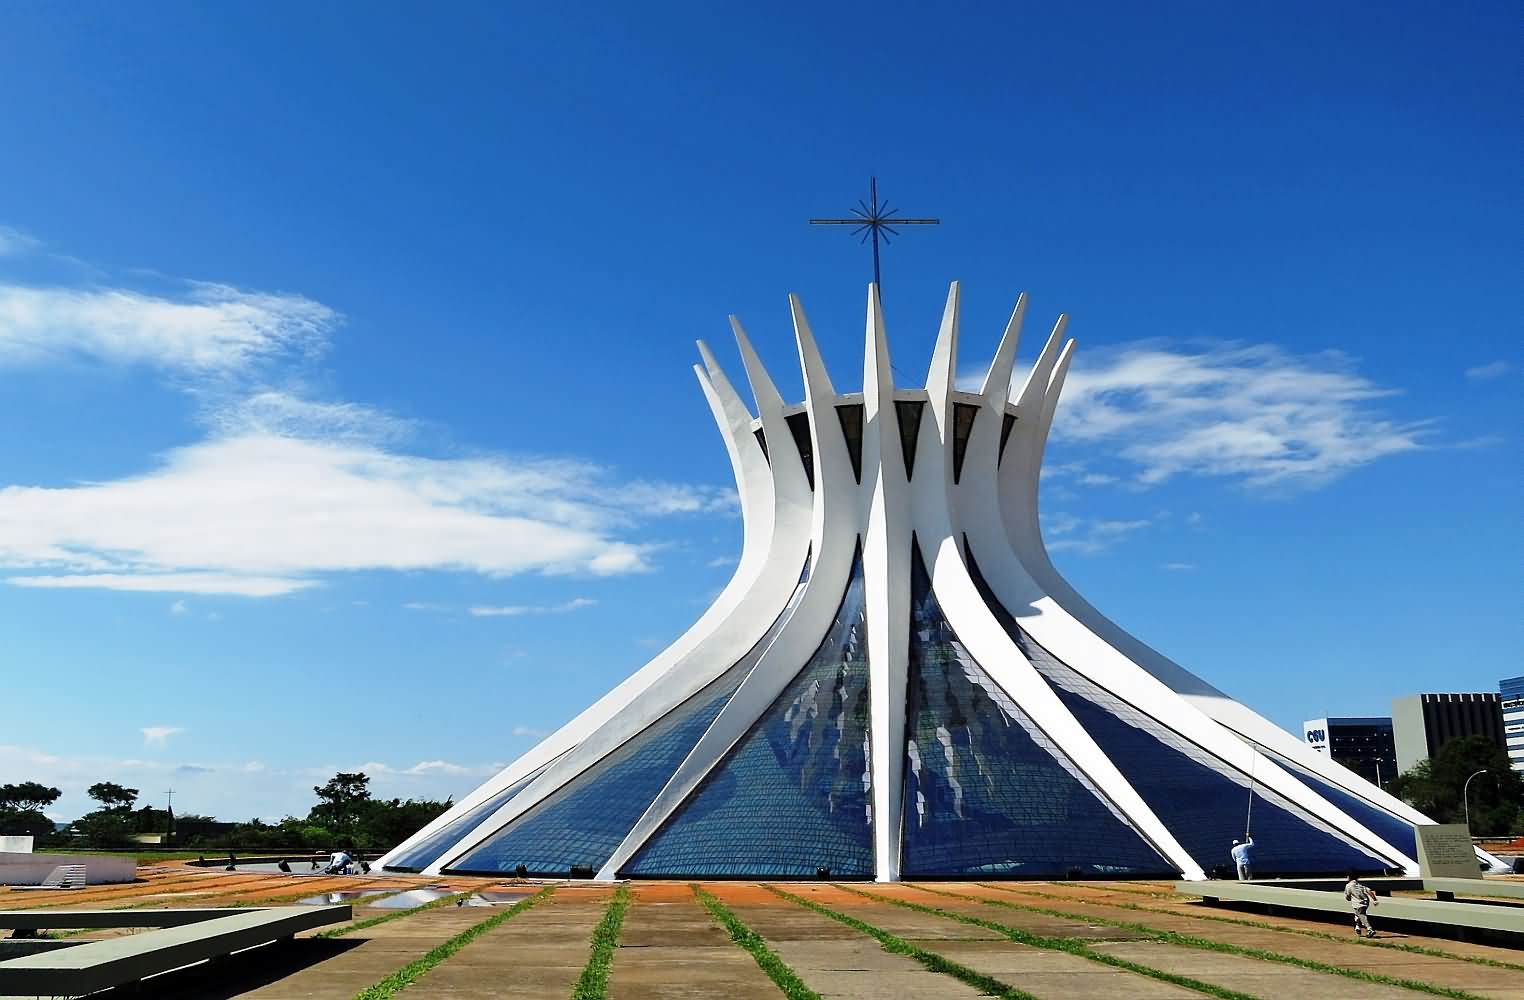 The Cathedral of Brasília Amazing View